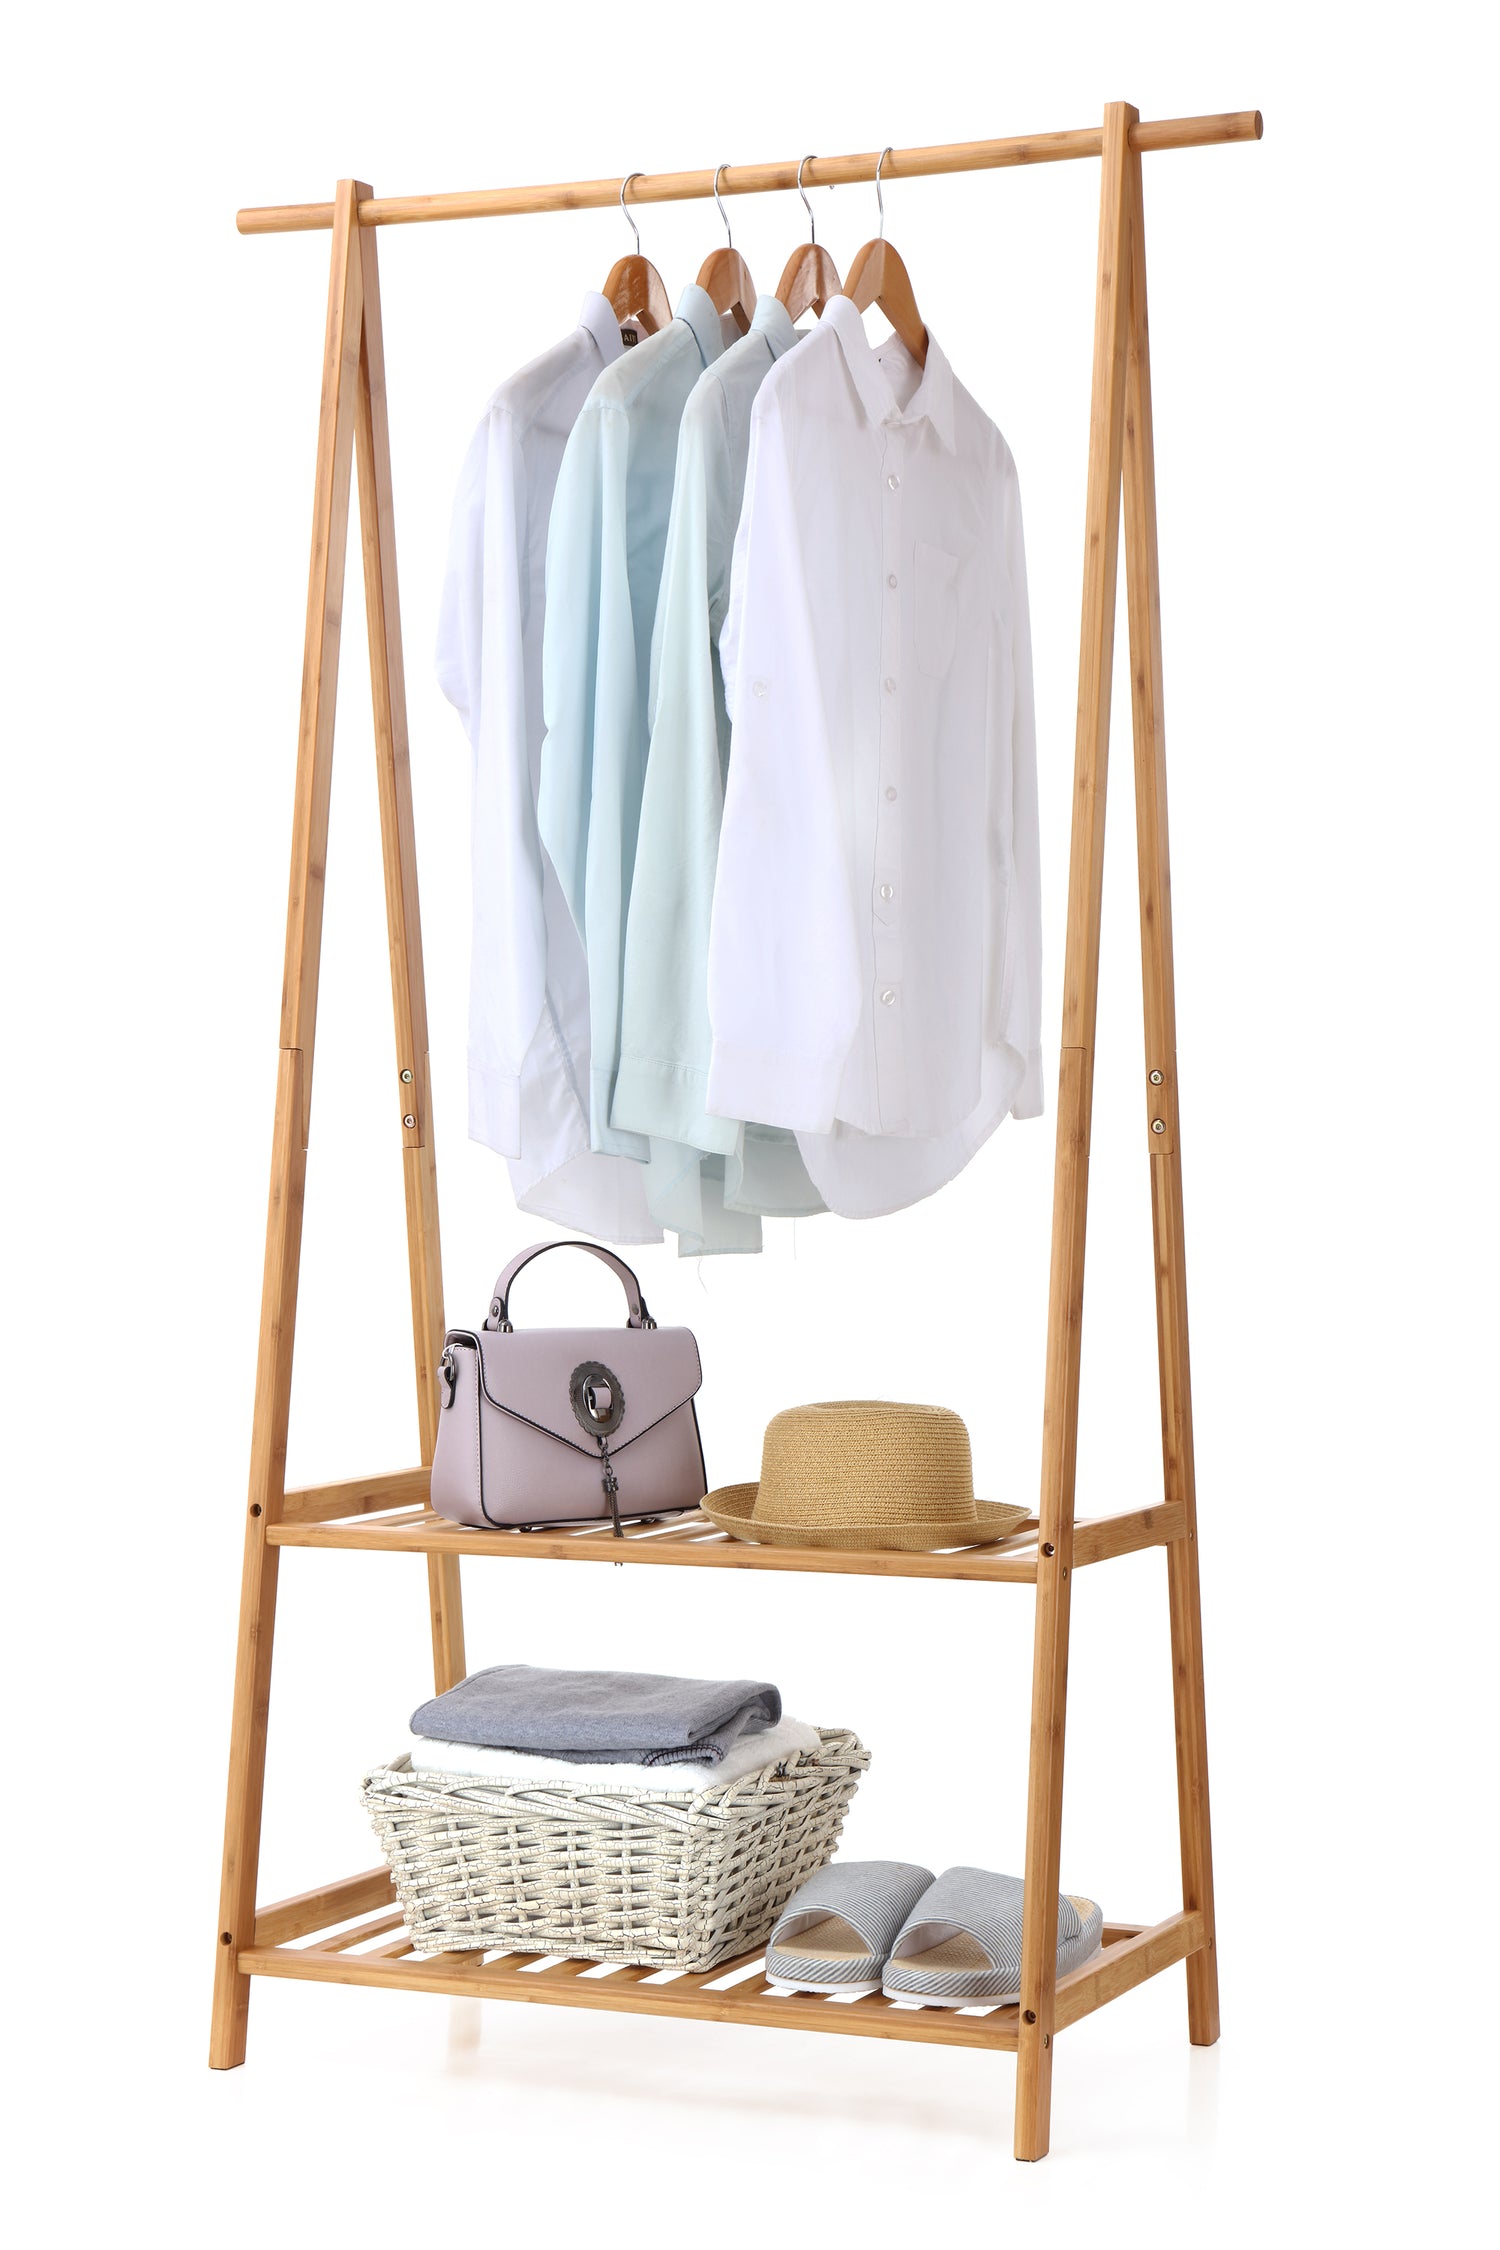 Ufine Bamboo Garment Rack 6 Tier Storage Shelves Clothes Hanging Rack with  Side Hooks, Heavy Duty Clothing Rack Portable Wardrobe Closet Organizer :  : Home & Kitchen